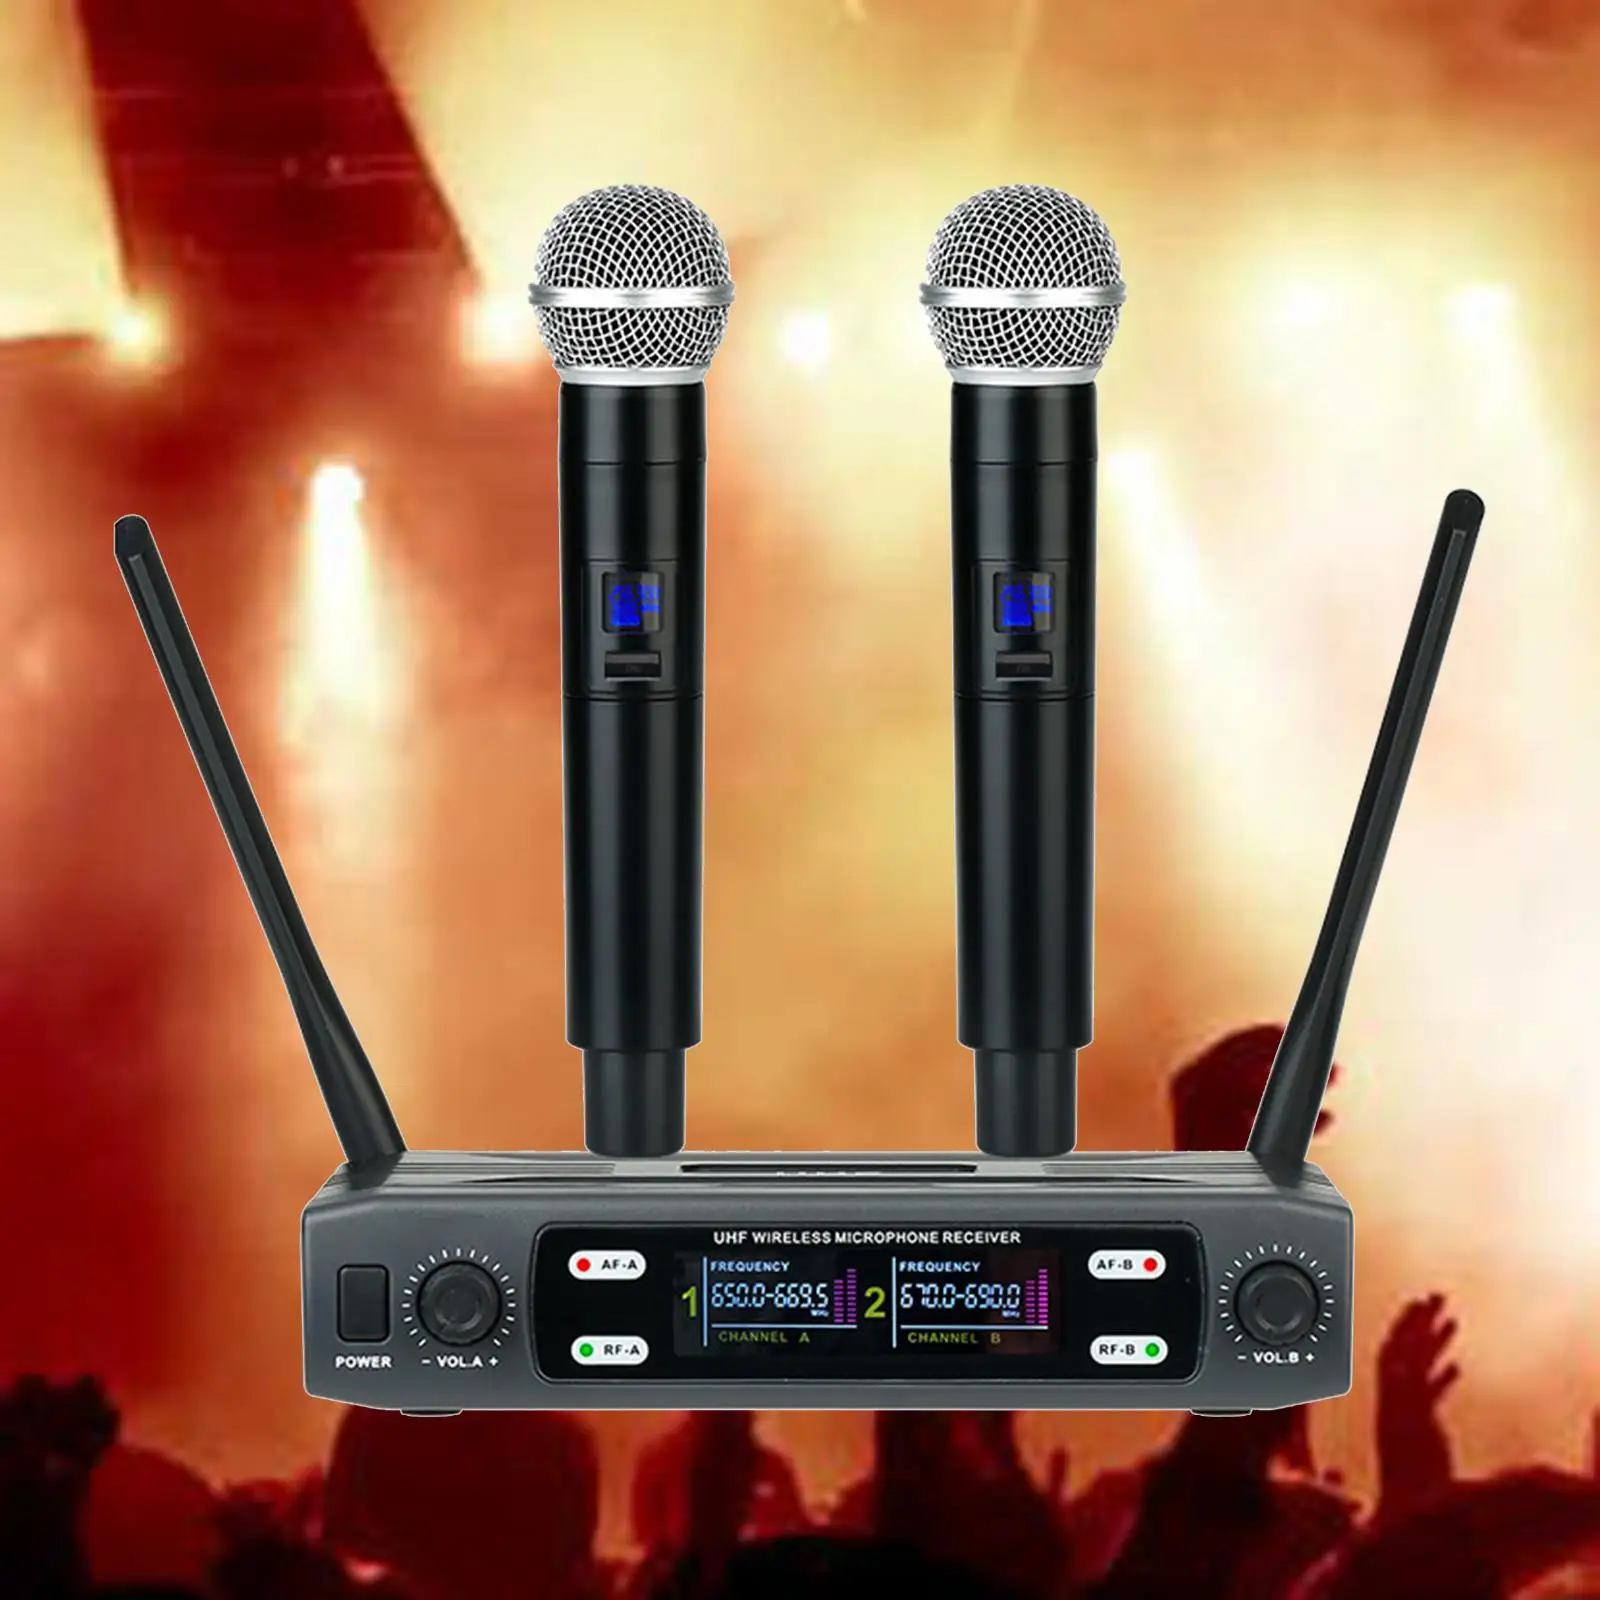 Dual Wireless Microphone System High Performance Premium Dual Wireless Mic Professional for Speech DJ Performance Stage Meeting